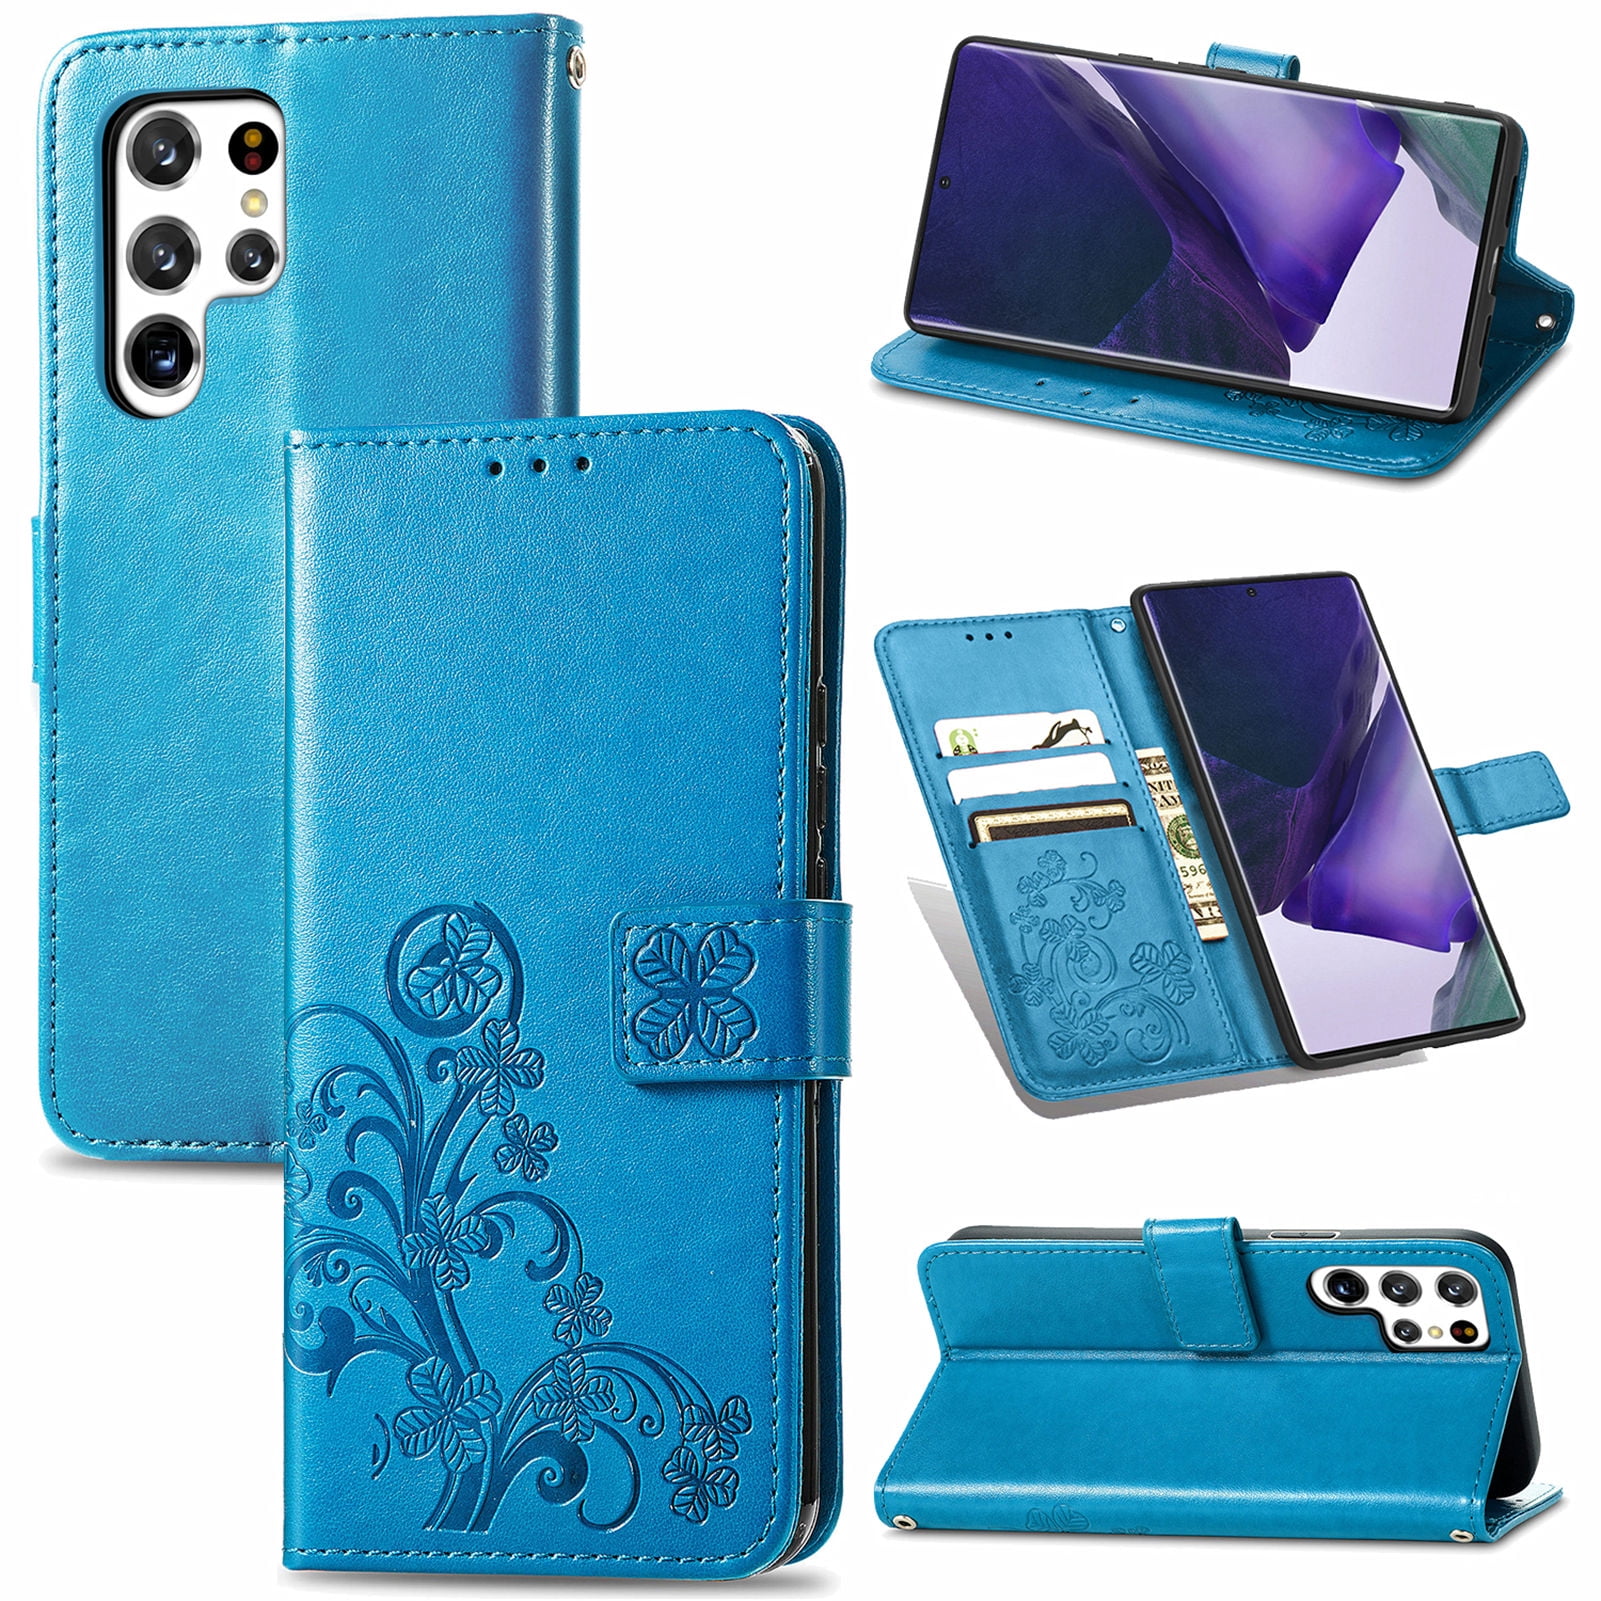 for Samsung Galaxy S23 Ultra Wallet Case, Card Holder Slot Ultra Slim Thin  Clear Flexible TPU Gel Rubber Soft Skin Silicone Protective Phone Case for  Samsung Galaxy S23 Ultra, Blue 